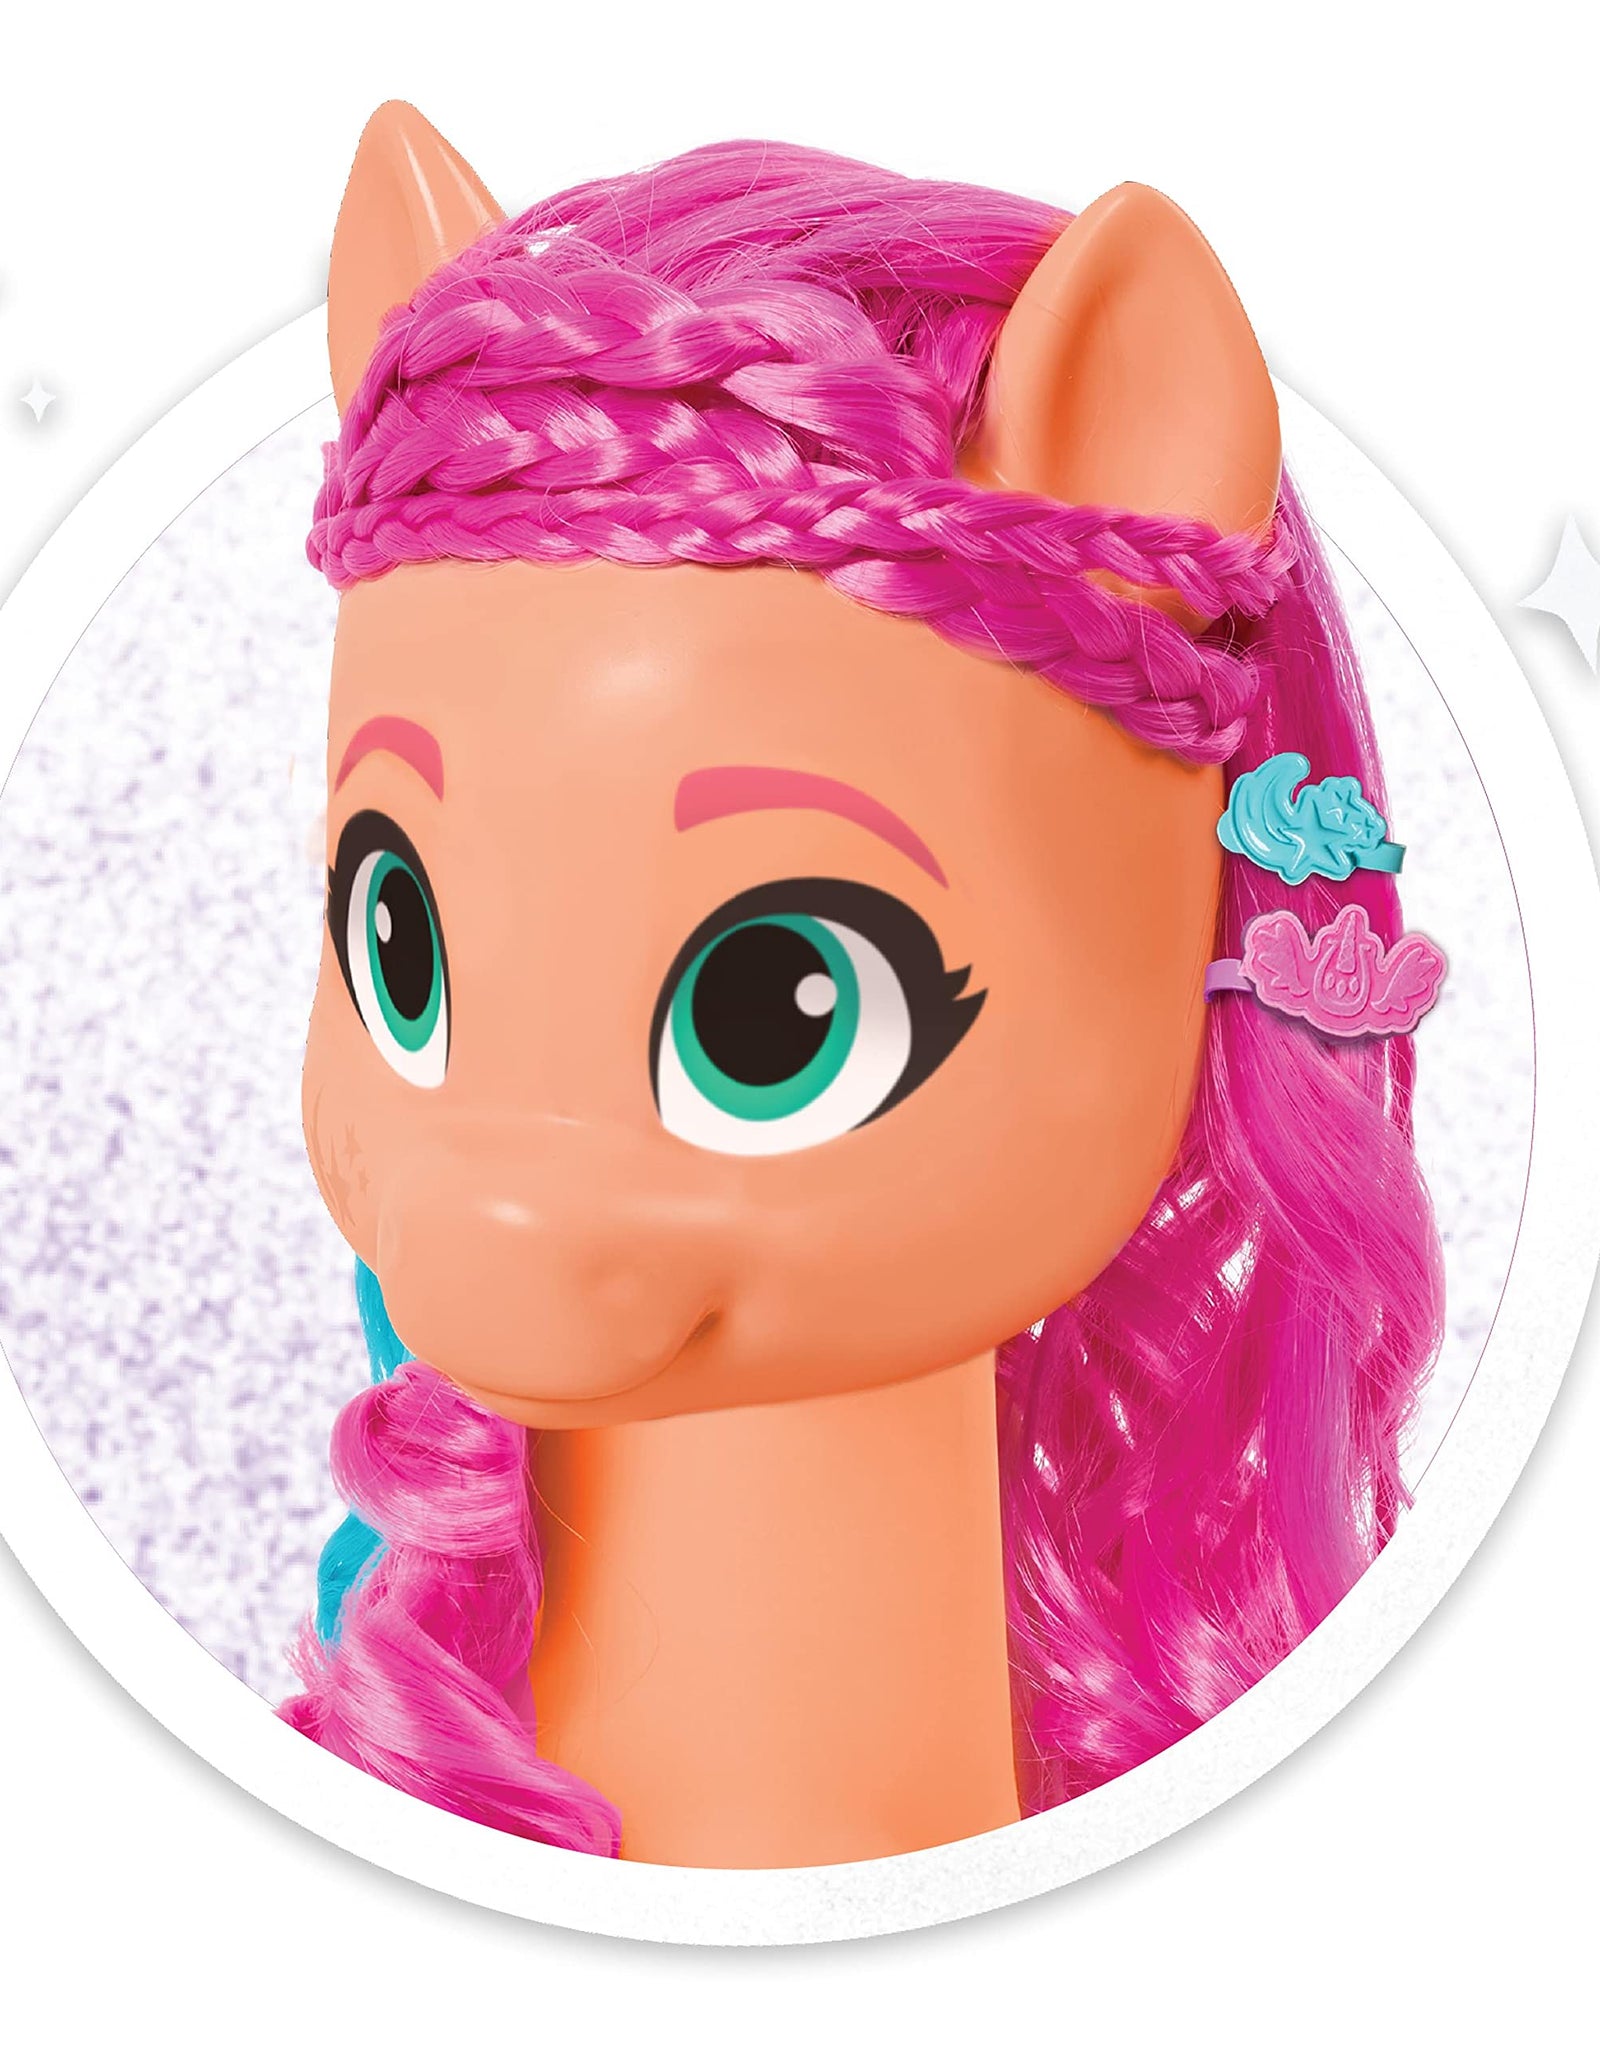 My Little Pony Sunny Starscout Styling Head, Color Change, 14-Pieces Include Wear and Share Accessories, Pink, Hair Styling for Kids, by Just Play